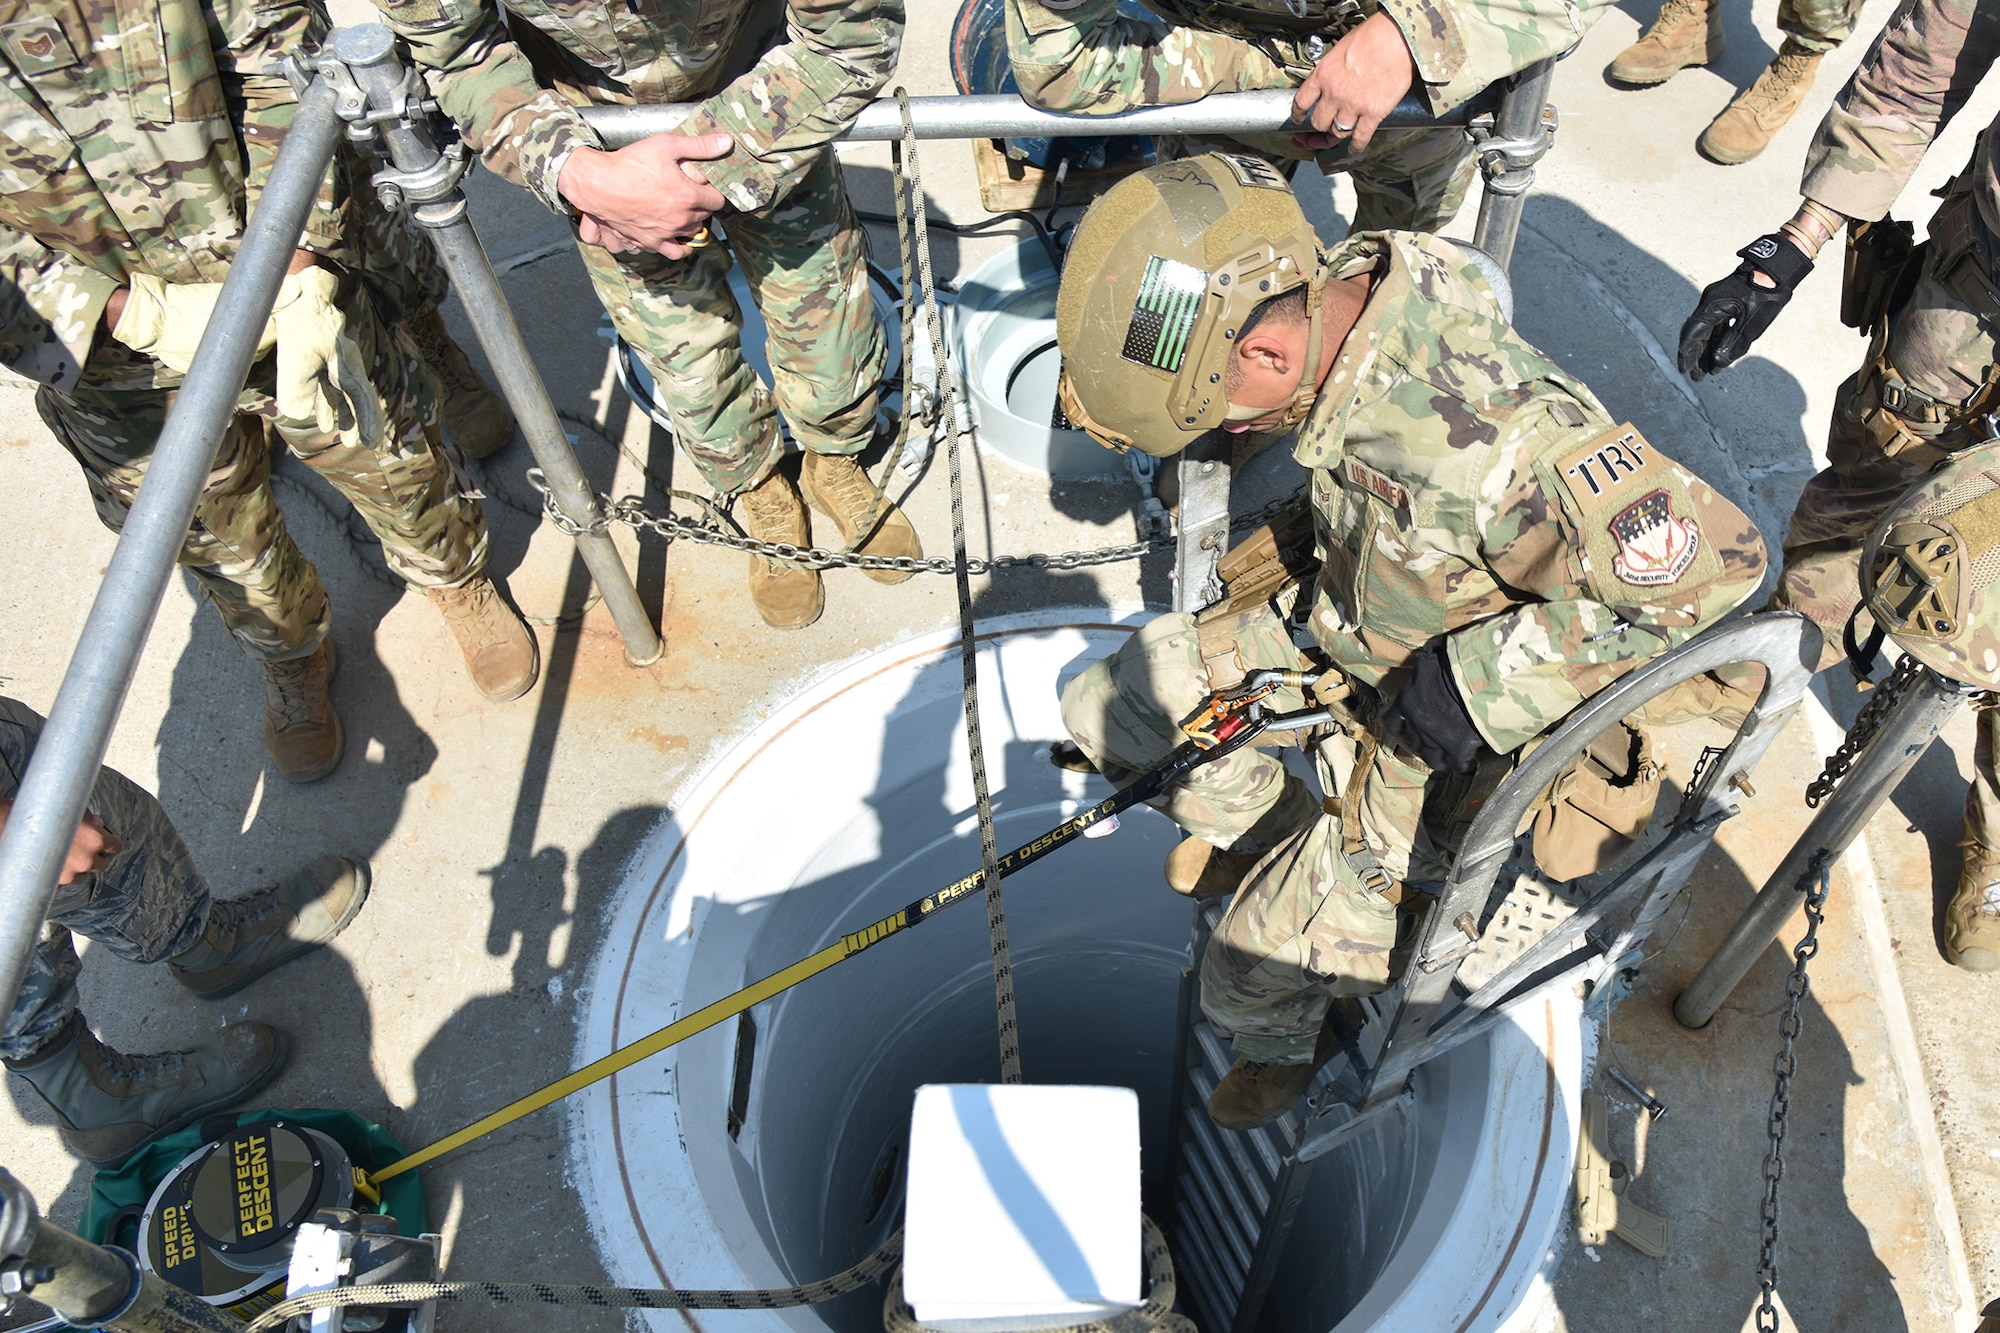 An Airman is at the top of a ladder, descending into a shaftway into a launch facility.